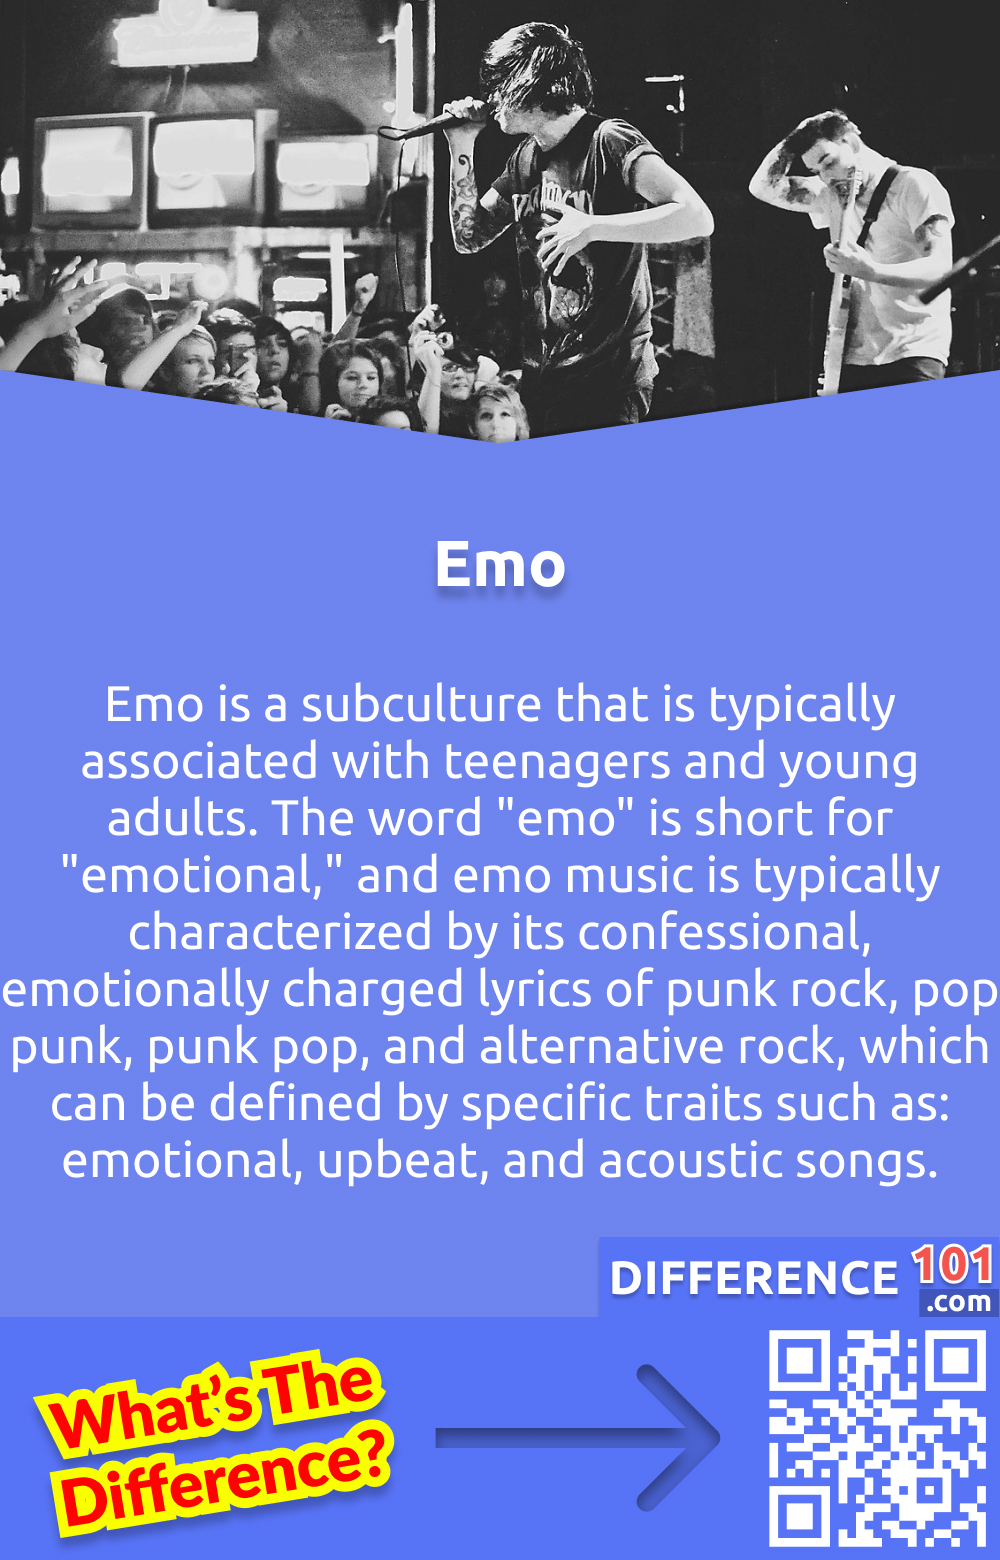 What Is Emo? Emo is a subculture that is typically associated with teenagers and young adults. The word "emo" is short for "emotional," and emo music is typically characterized by its confessional, emotionally charged lyrics of punk rock, pop punk, punk pop, and alternative rock, which can be defined by specific traits such as: emotional, upbeat, and acoustic songs. Emo is usually performed by singers or groups with emotional vocals.
Emo fashion is often characterized by tight jeans, black clothing, and dyed hair. Emo culture is often associated with angst, depression, and loneliness.